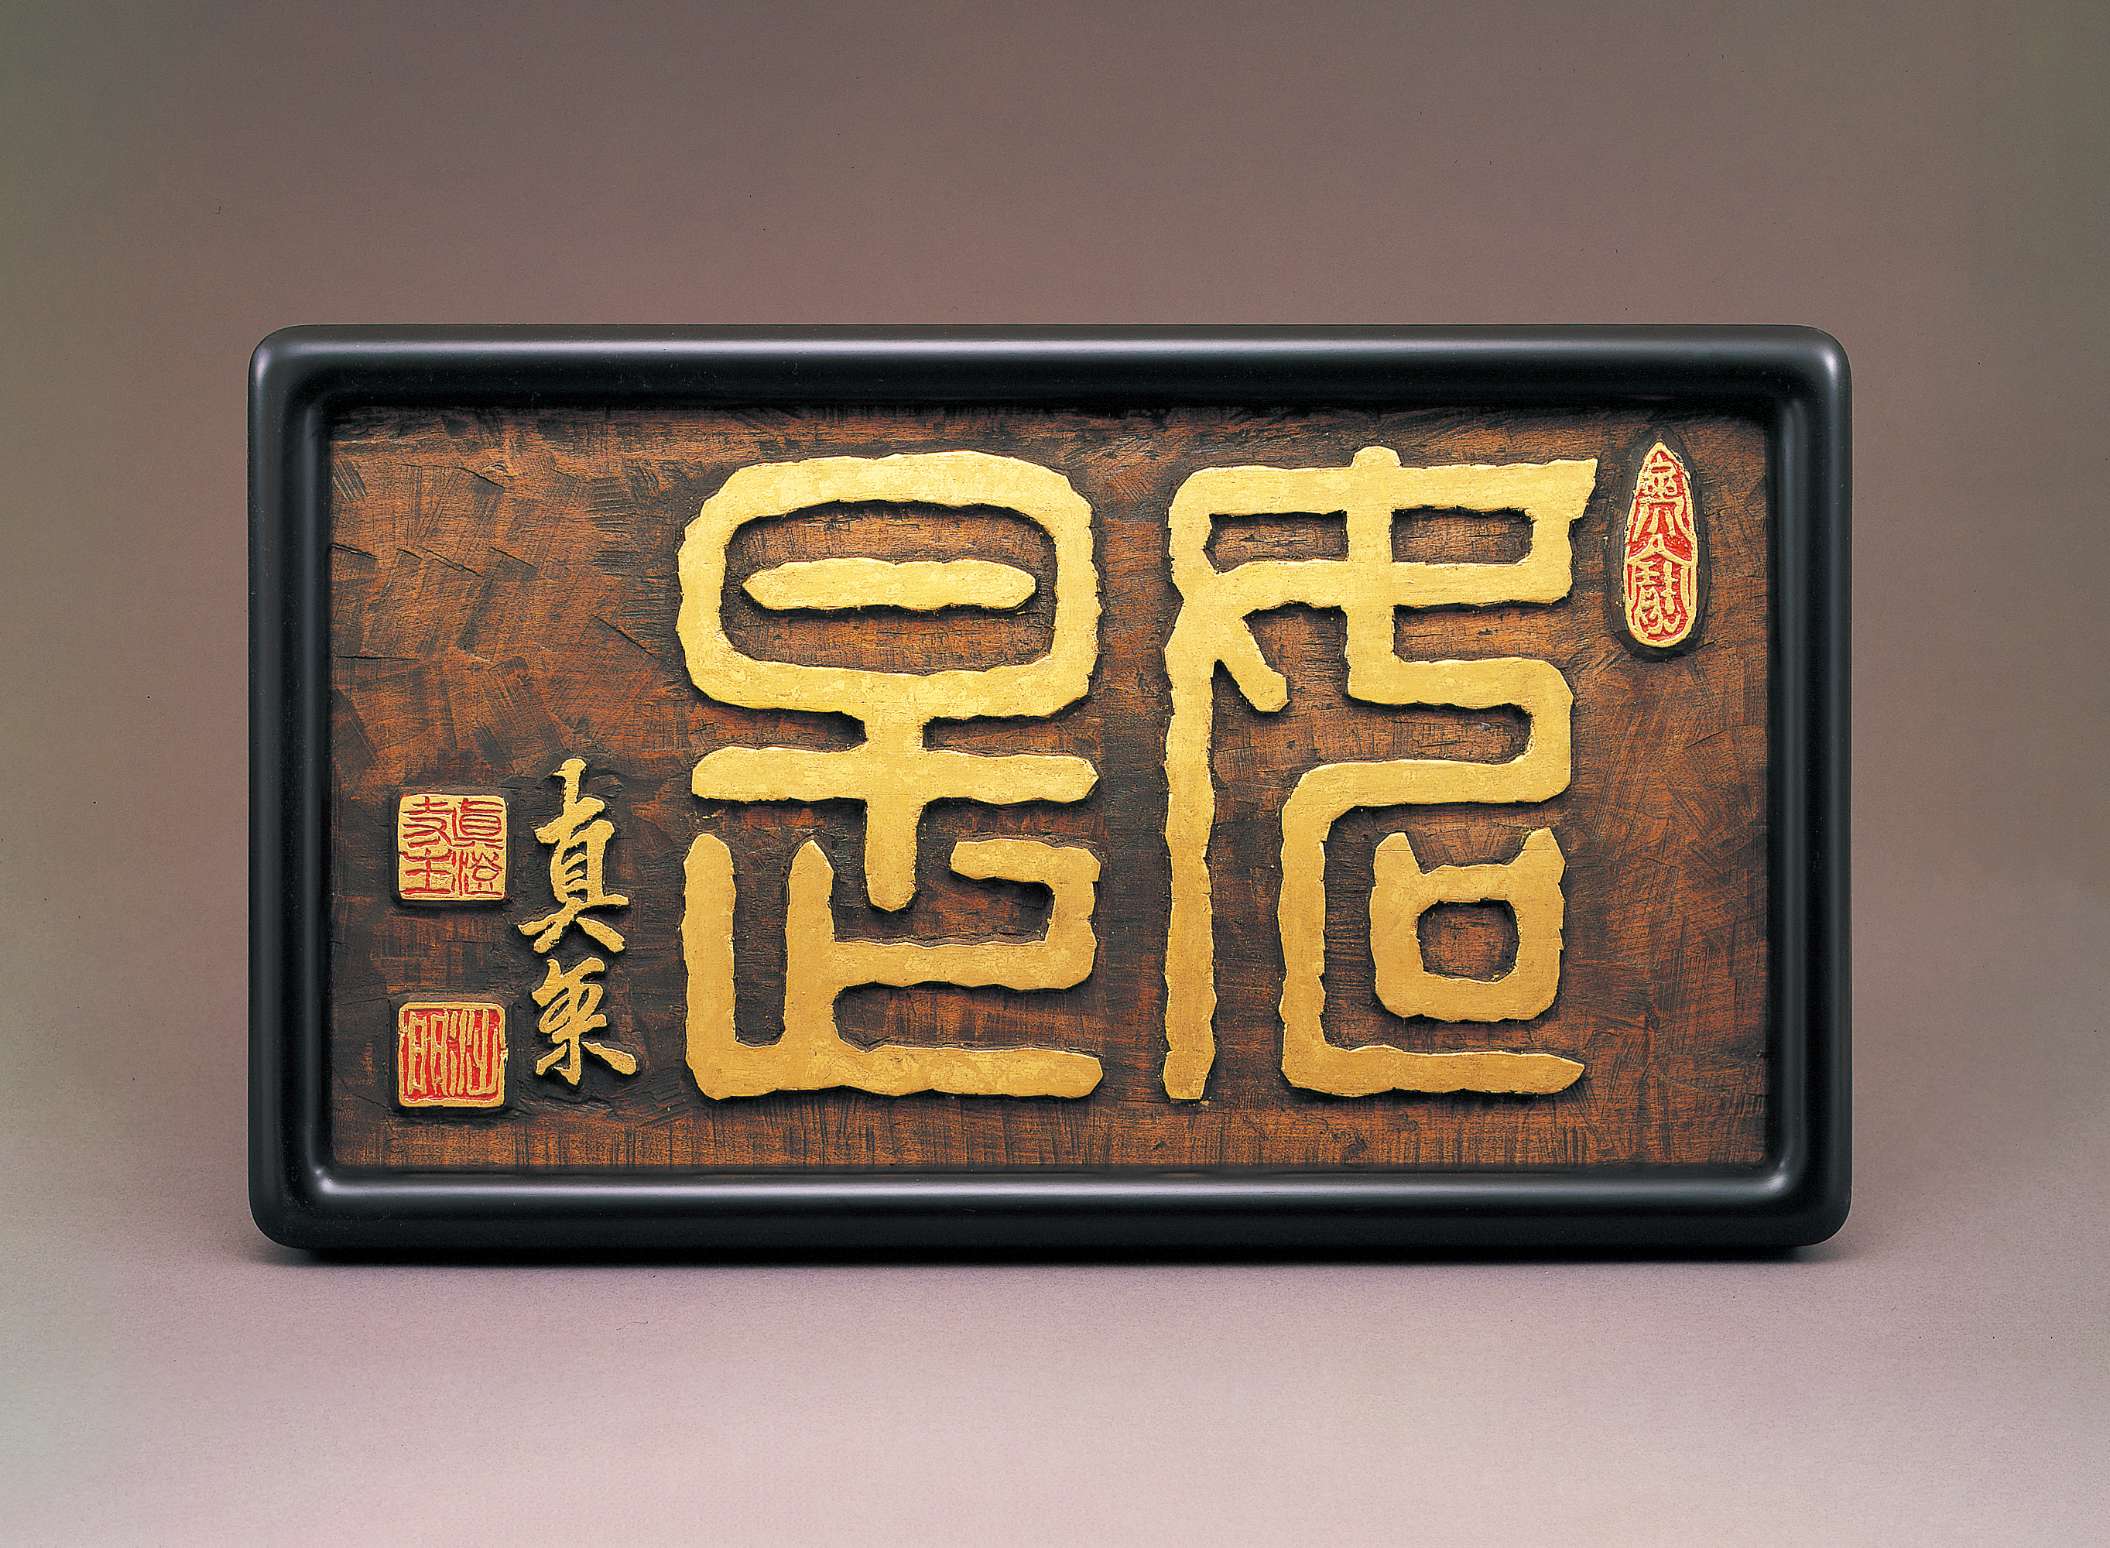 Stylized, thick-lined Japanese characters in gold are carved into a slab of dark brown wood in a black frame, embellished by adjacent golden calligraphy and red and gold seals.